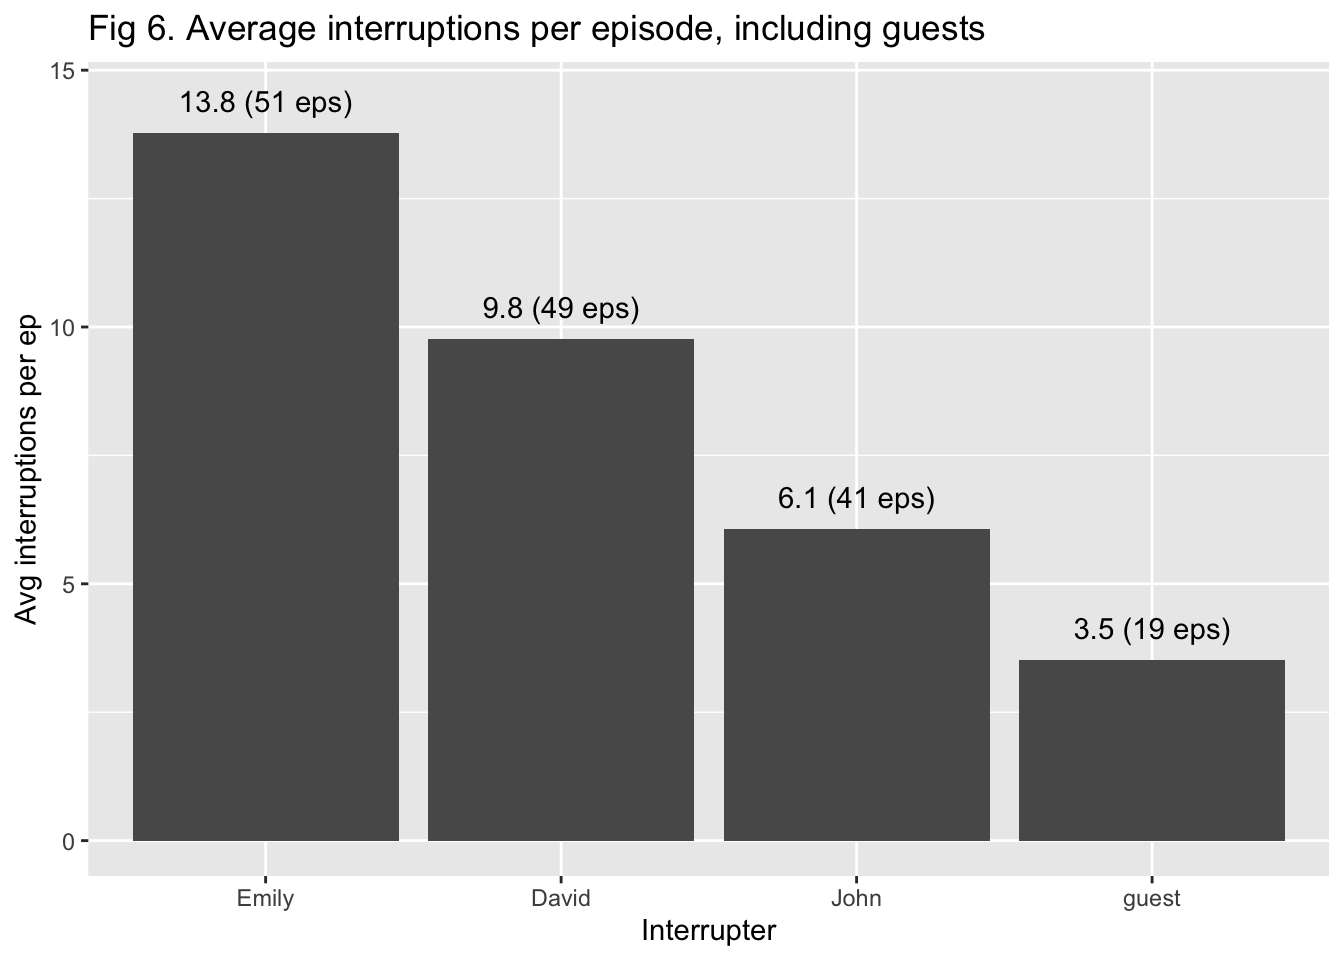 Figure 6 Average interruptions per episode, including guests. Shows guests' rate of interruptions is also very low.